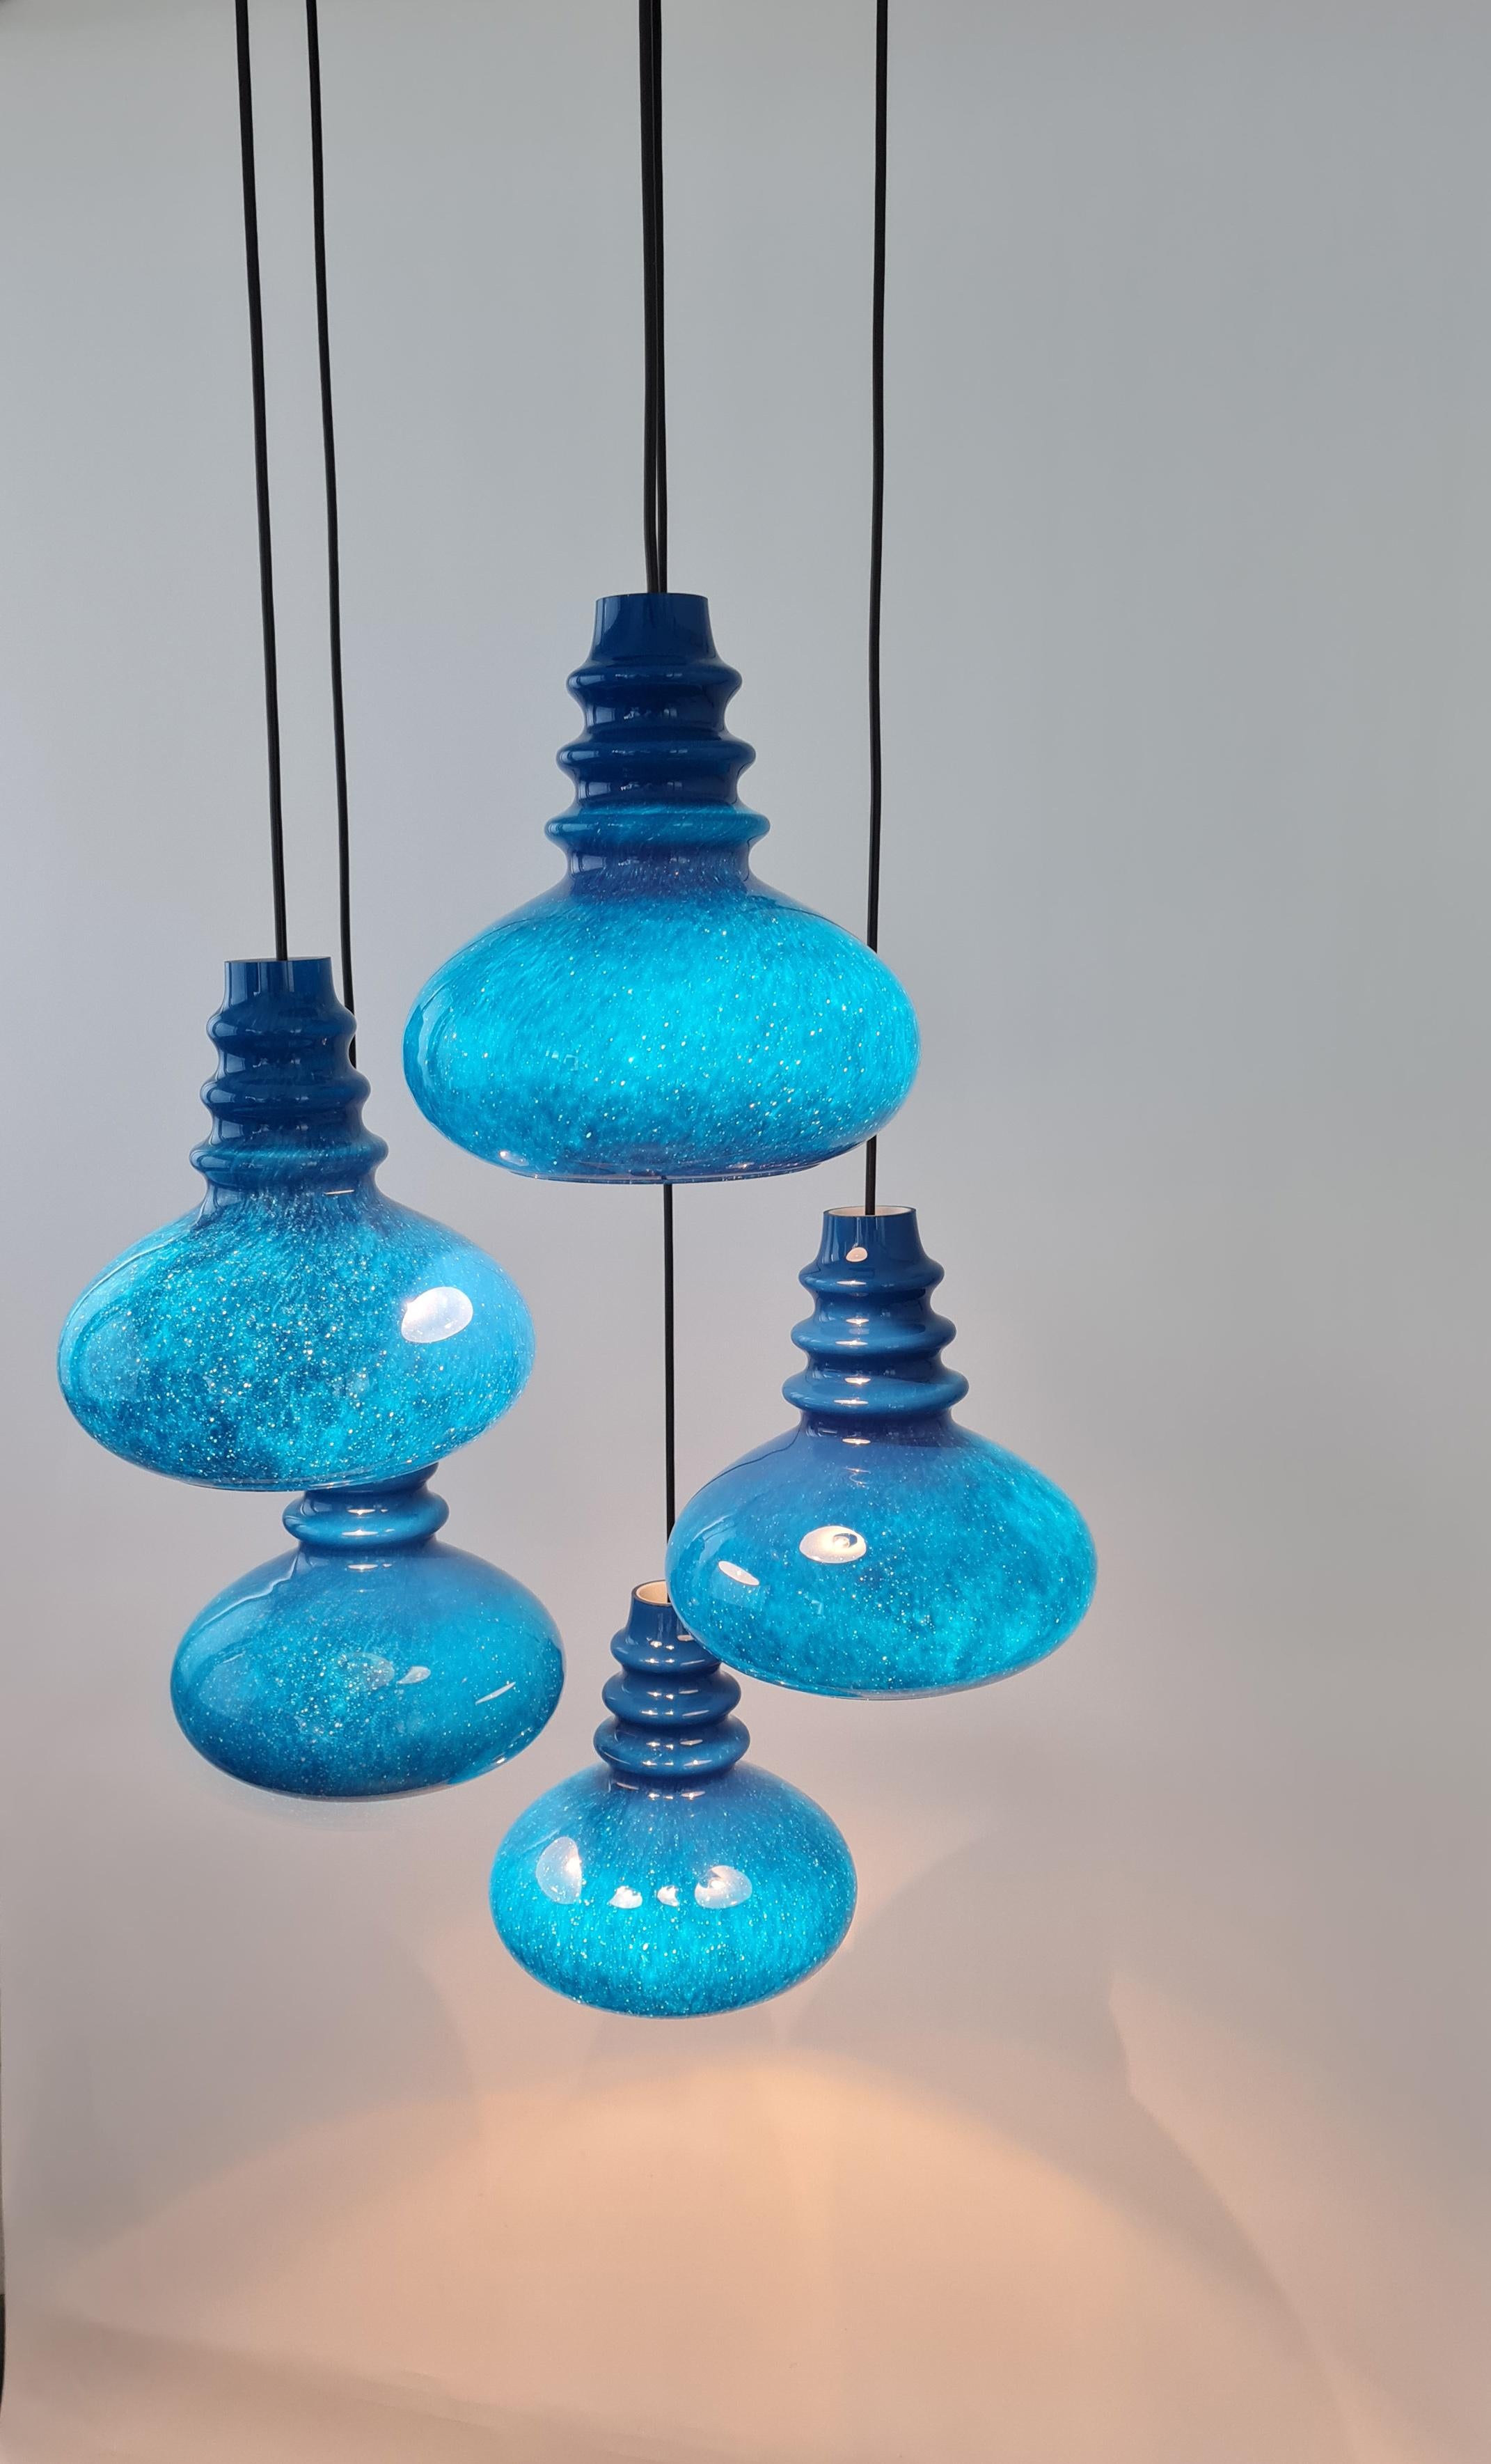 A special large cascading chandelier designed by Wagenfeld for Peill & Putzler Leuchten, manufactured in Germany, circa 1970s with 5 blue round glasses.
Wonderful form and stunning light effect.

Sockets: 5 x E26 /E27 standard bulb. (100 W